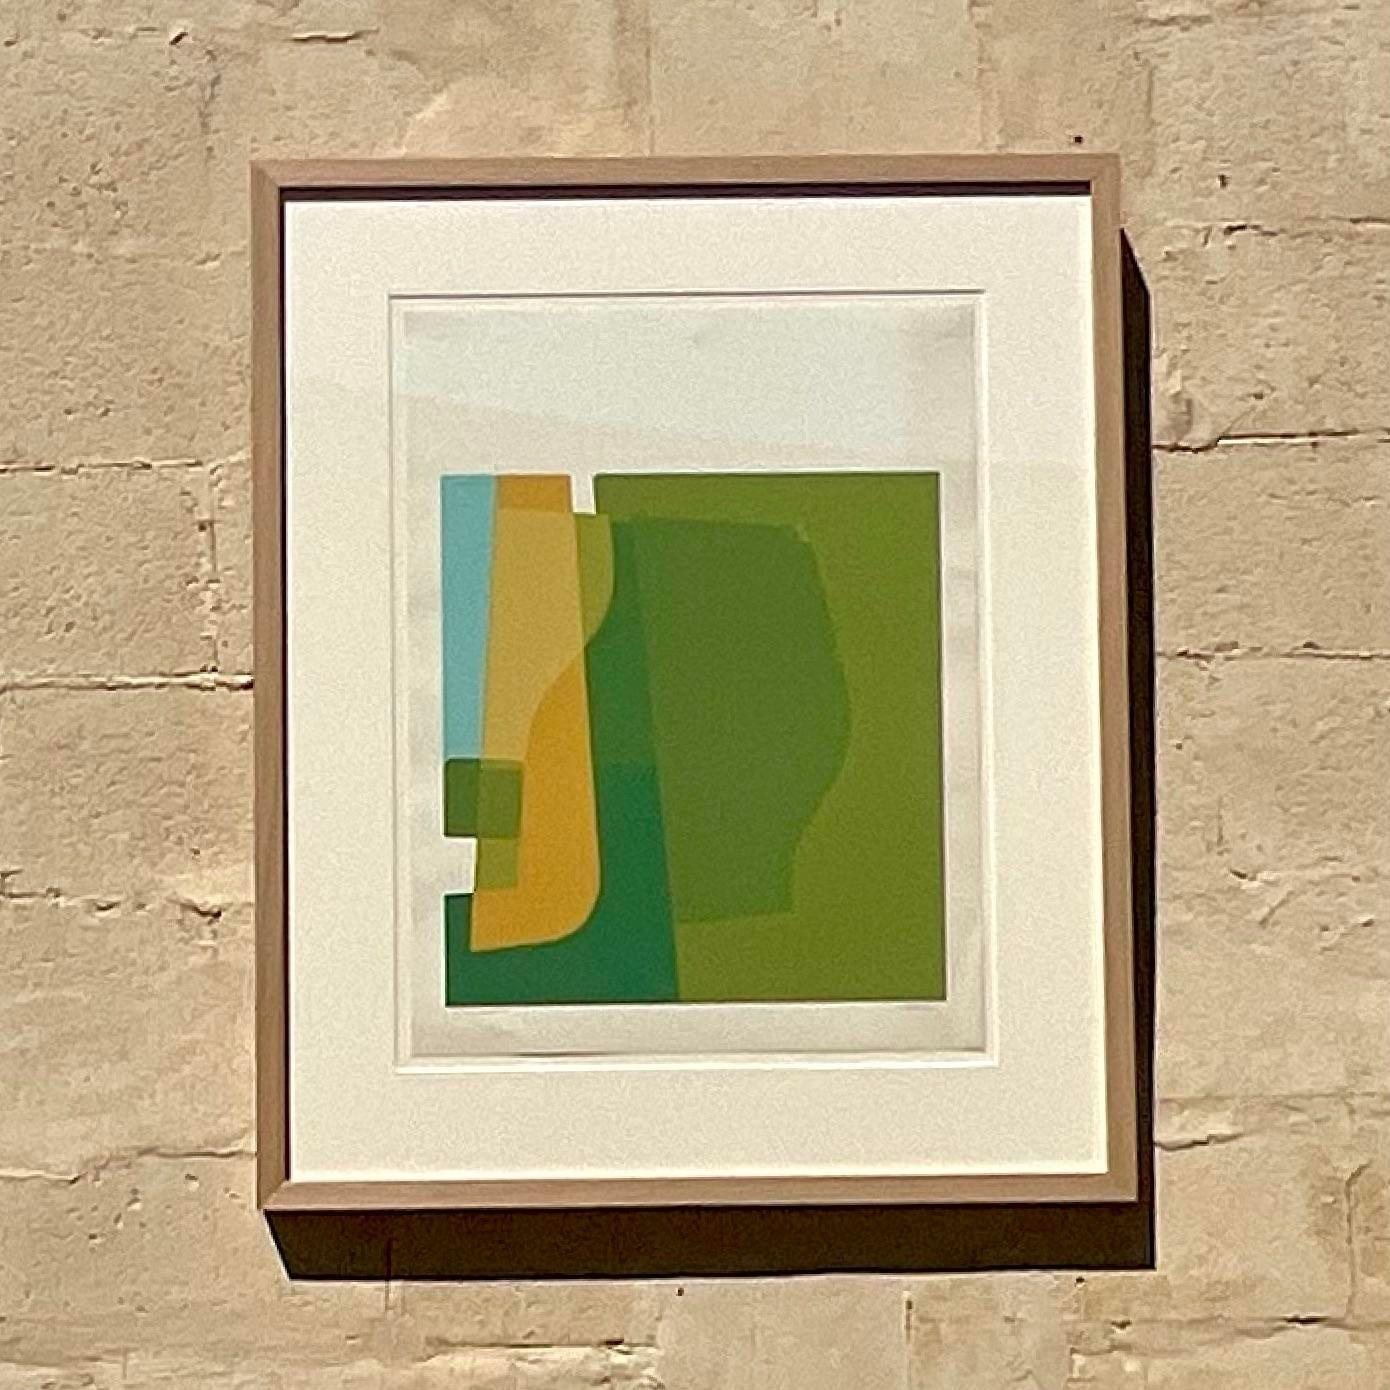 Vintage abstract lithograph of various curved shapes in differentiating shades of green. The shape come together to create a tasteful minimalist pop of color. Signed by the artist. Acquired from a Palm beach estate.